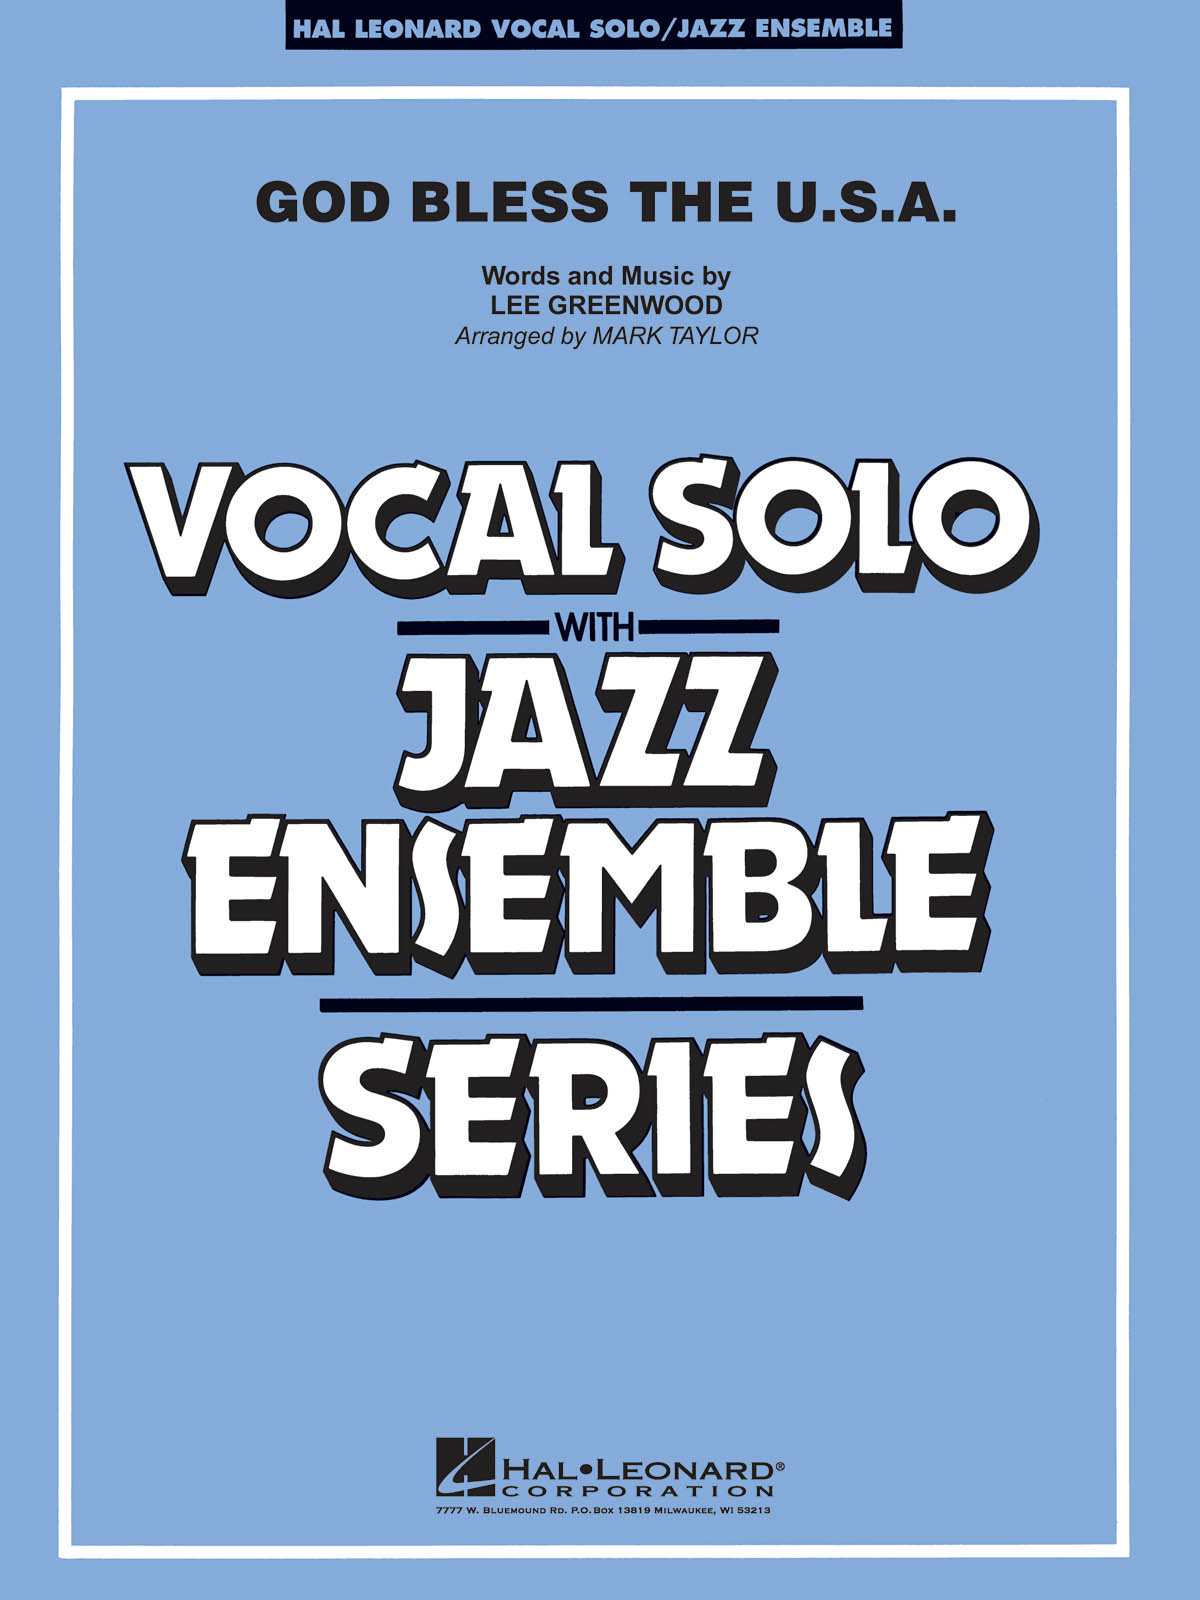 Lee Greenwood: God Bless the U.S.A.: Jazz Ensemble and Vocal: Score & Parts